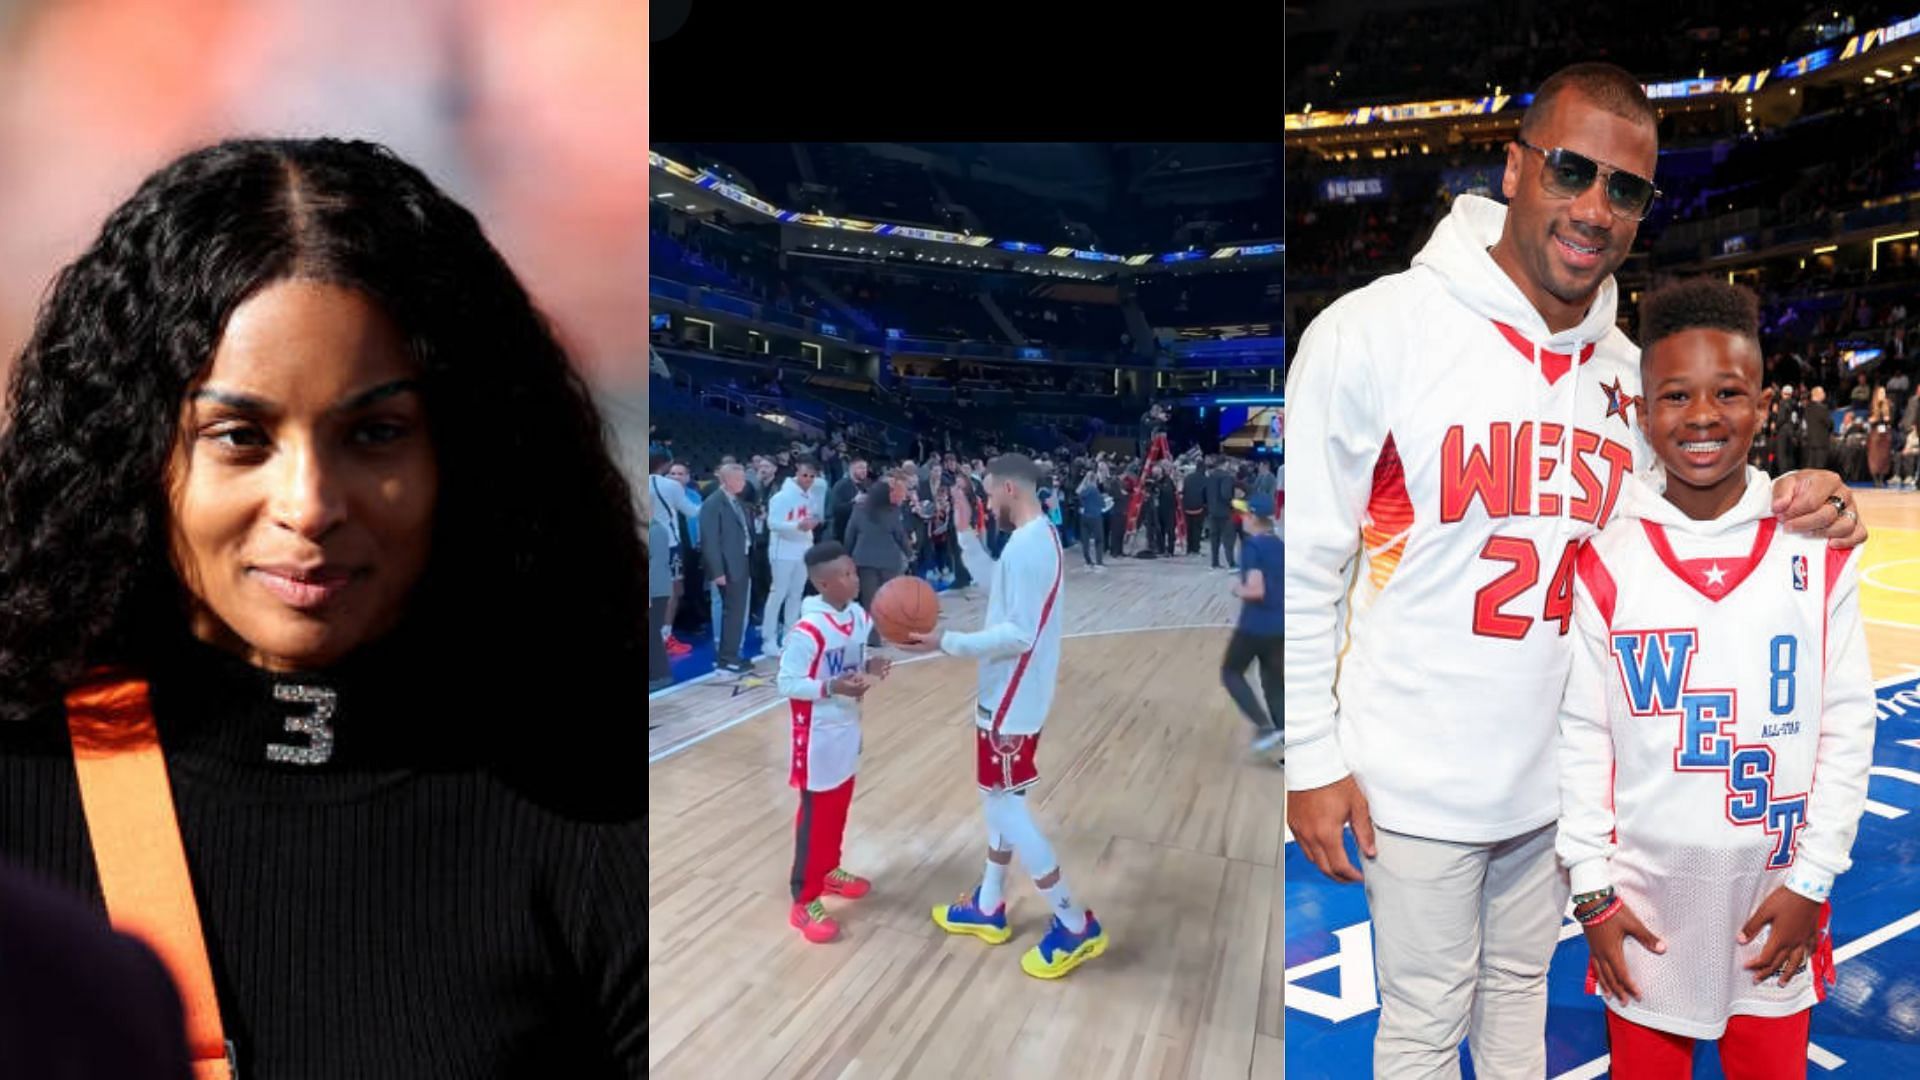 Ciara commented on the moment between her son Future and NBA champion Steph Curry.